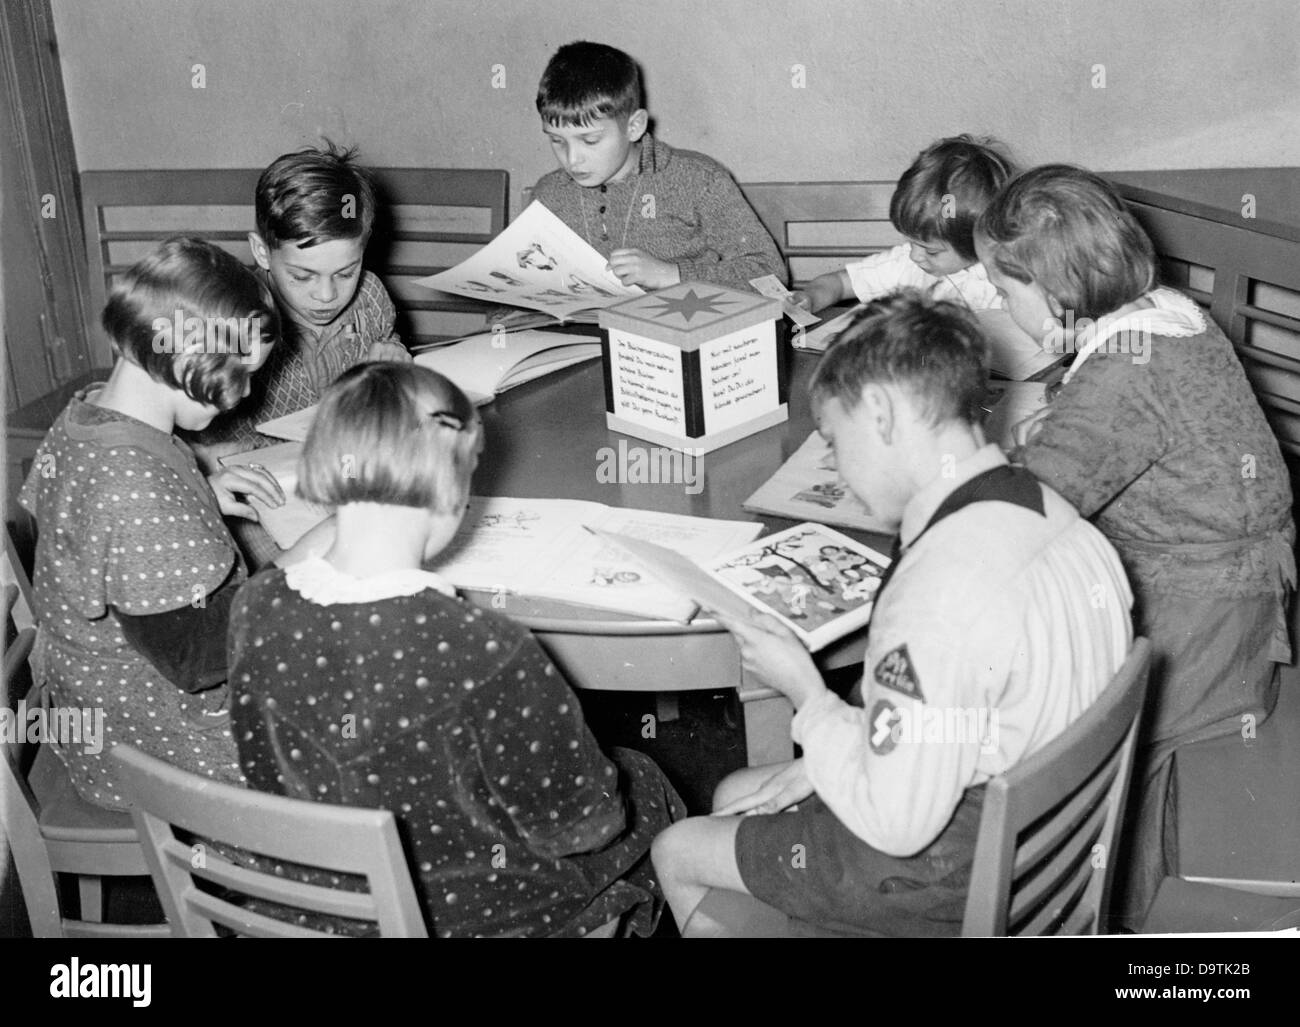 Girls and boys sit at a table and read books in the children's reading room of a library in Berlin, Germany. One boy wears the uniform of the German Youth with a simple Sieg rune on his sleeve. Date unknown. The Nazi Propaganda! on the back of the image reads: 'To the coming week of the German book. A children's reading room and its small regulars. From 25 October to 1 November, the week of the German book will take place this year, whose goal it is to bring together book and people. - Archive image: View of a children's reading room in Berlin: The youngest generation sits peacefully at the ro Stock Photo